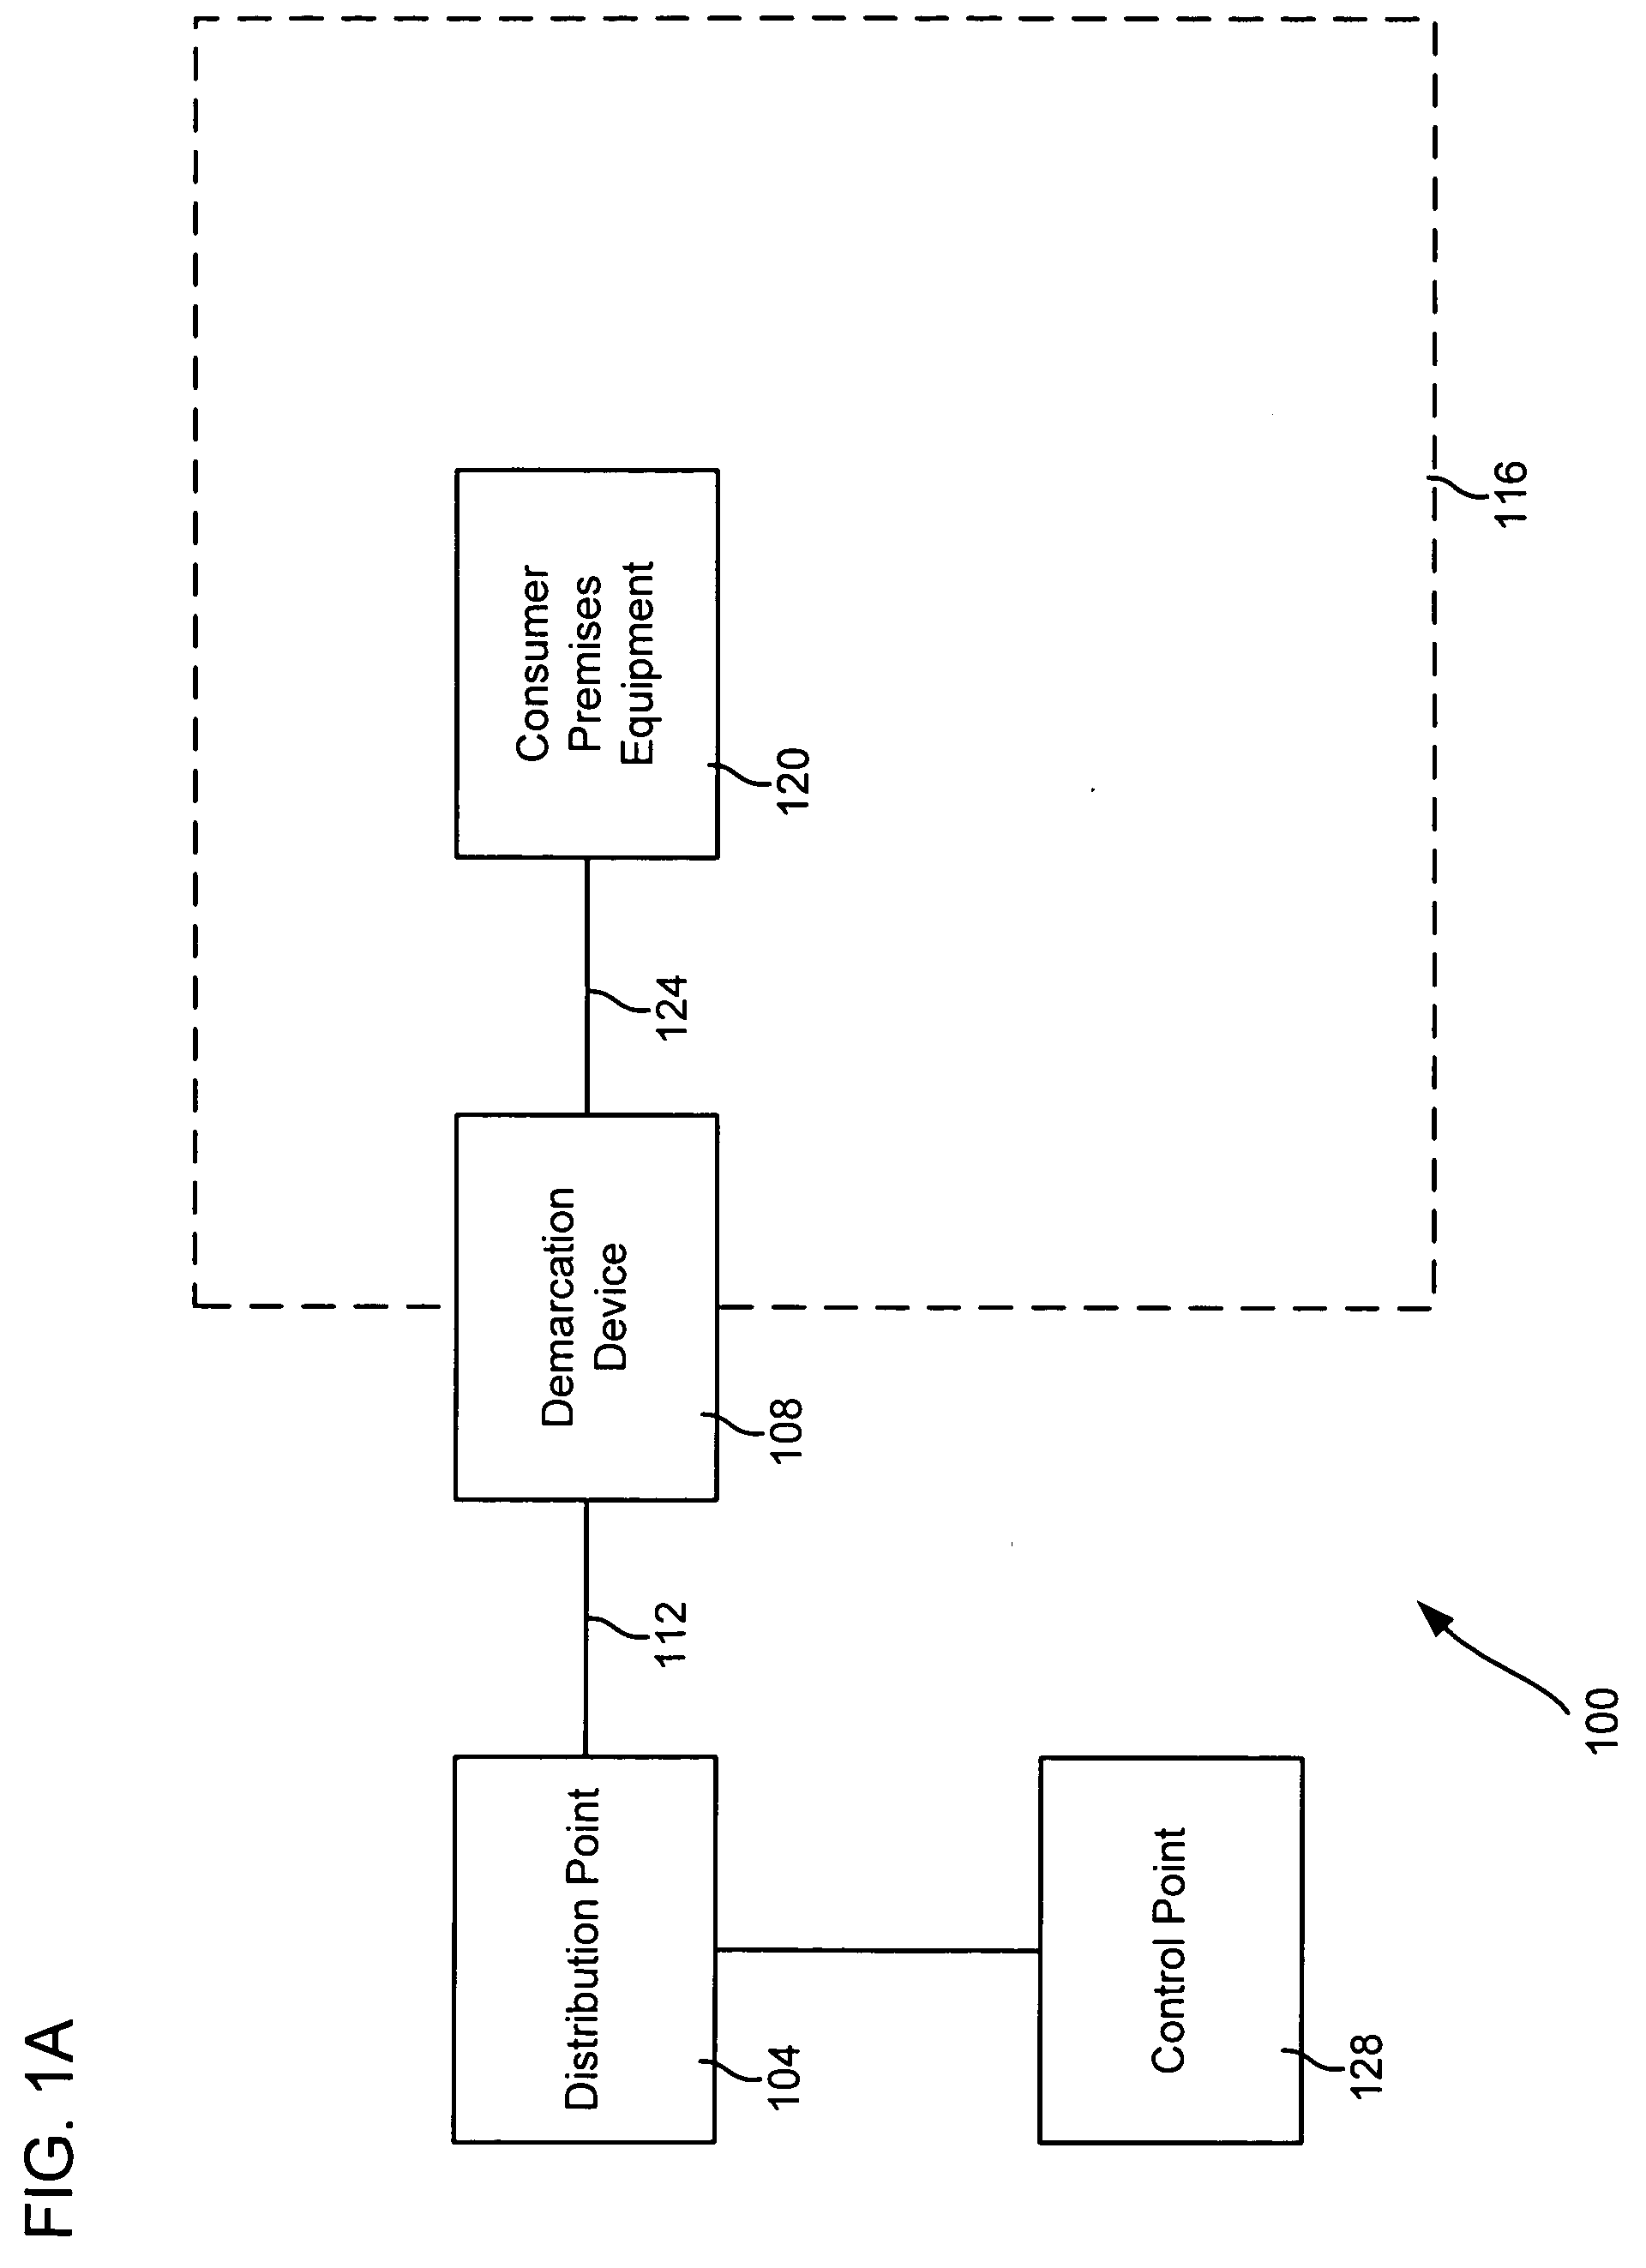 Methods, systems and apparatus for providing video transmissions over multiple media